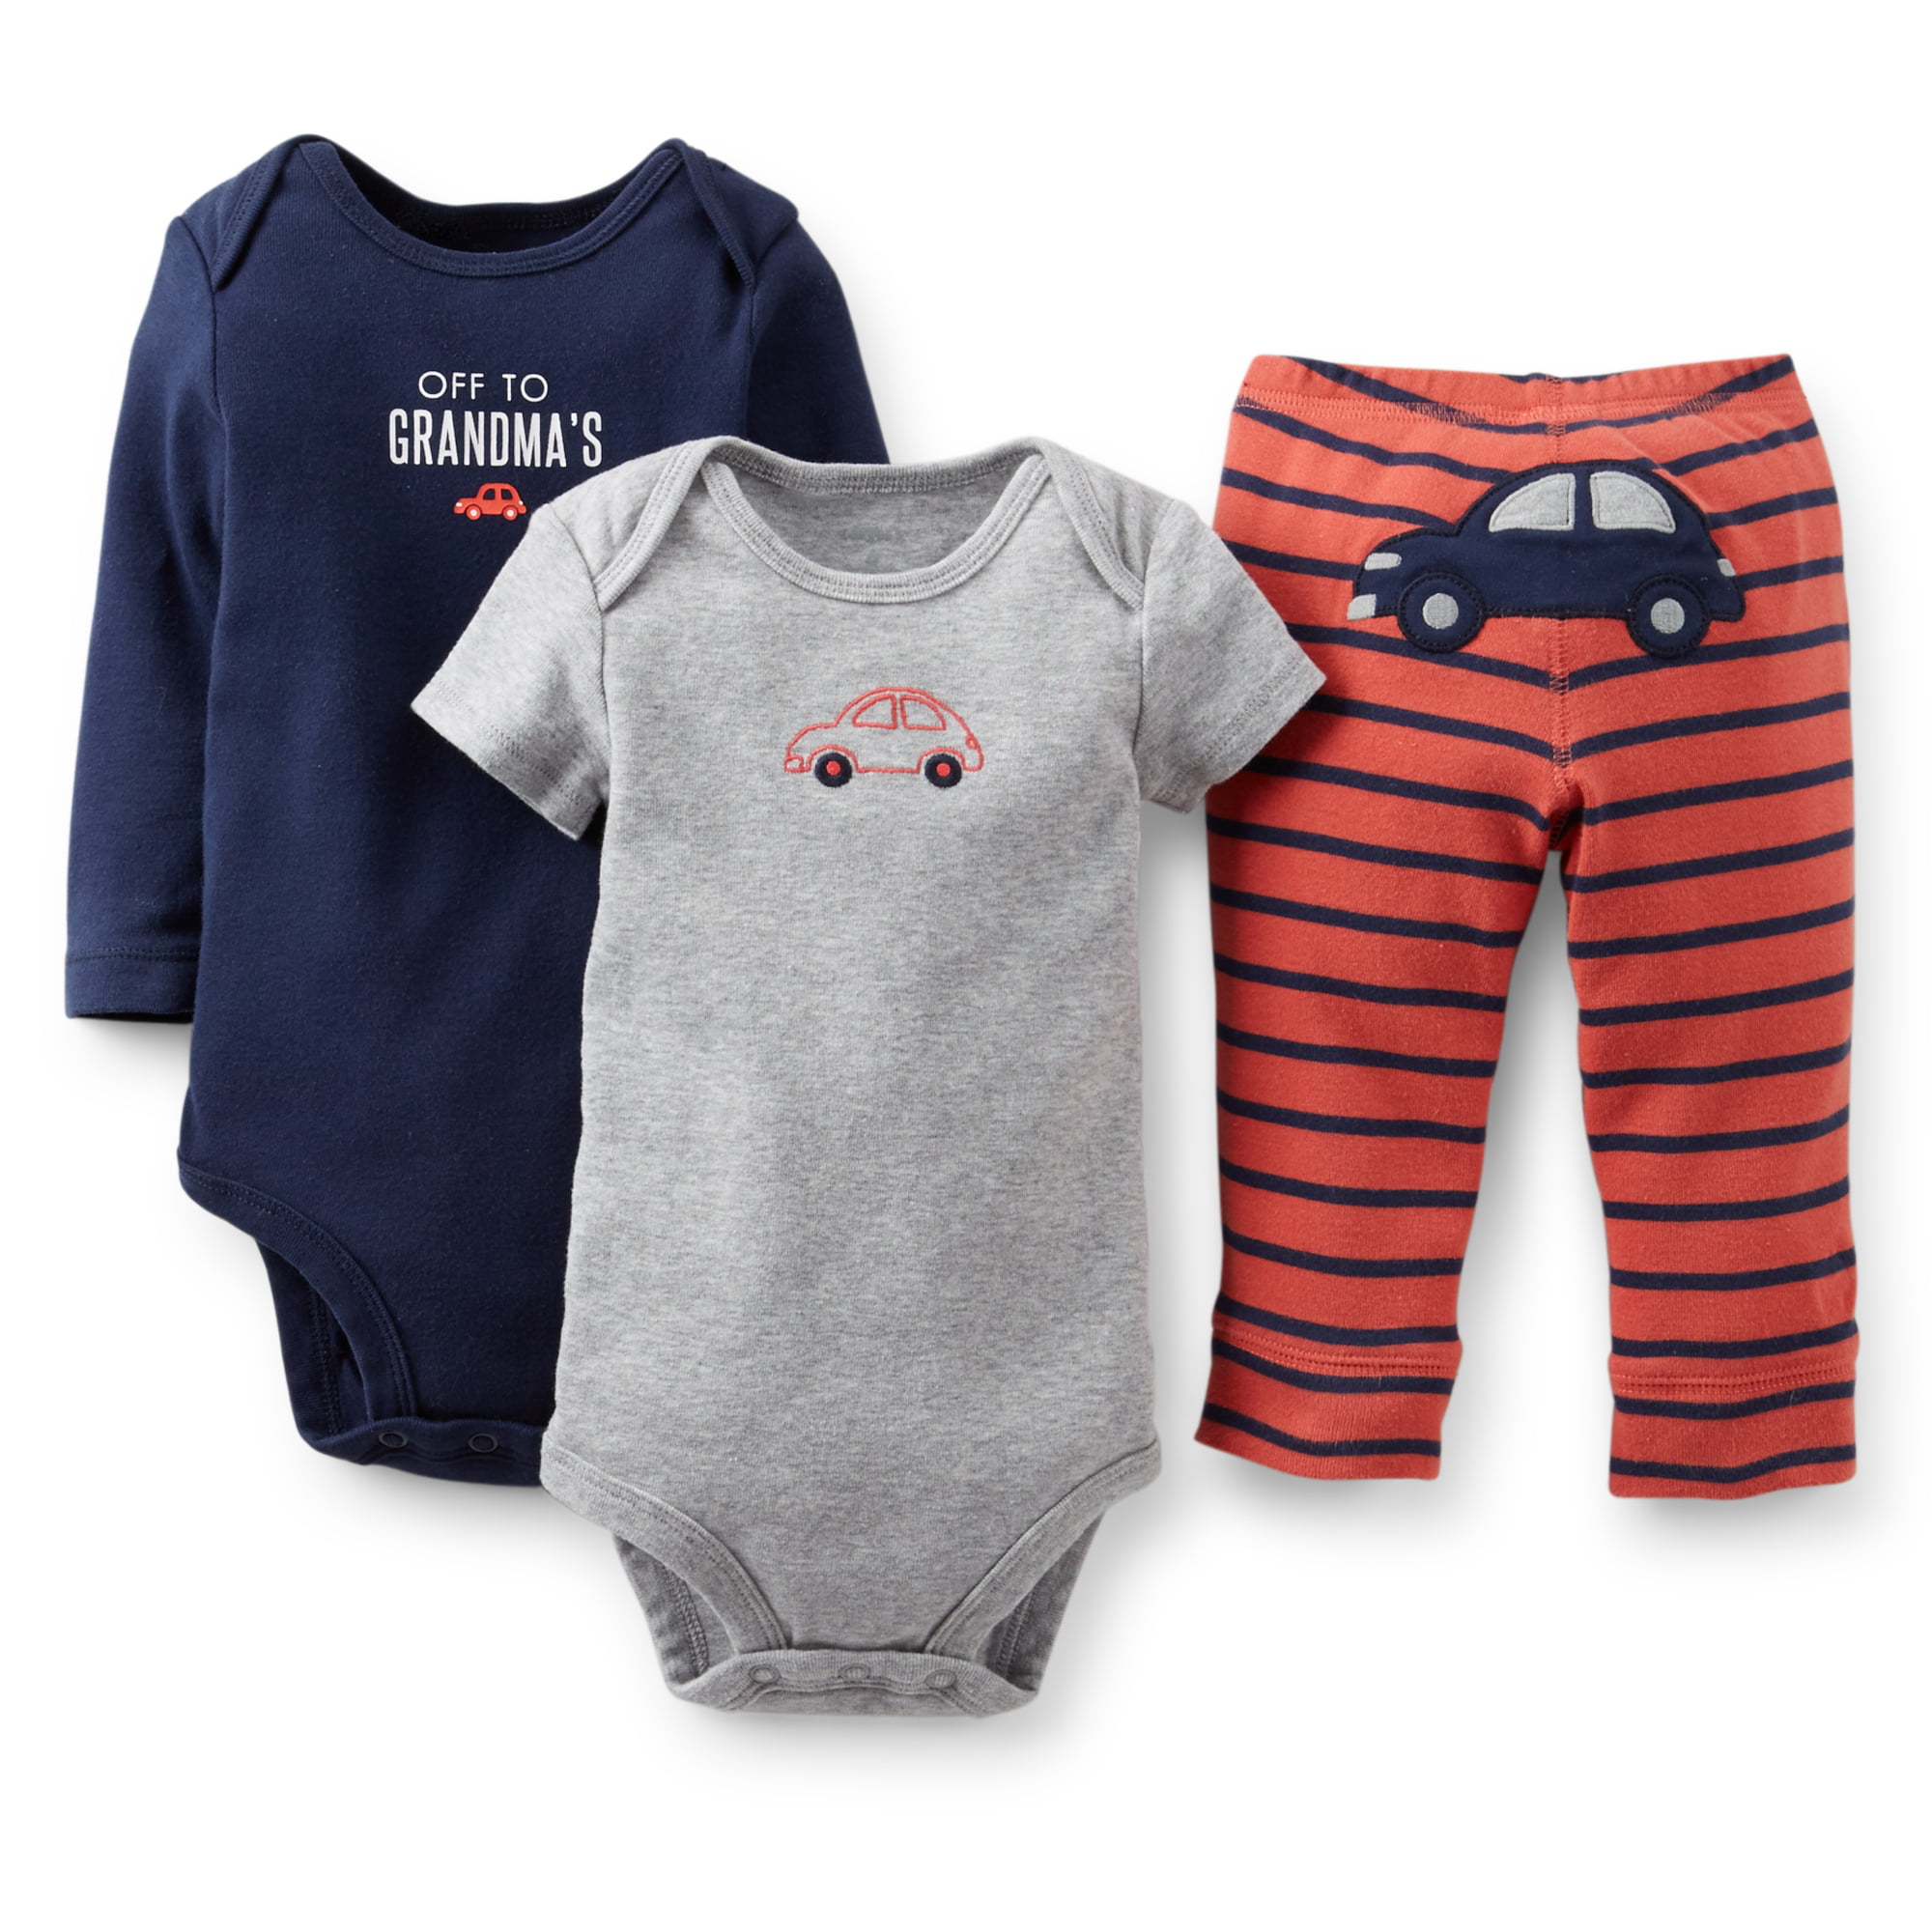 Carter's Carters Baby Clothing Outfit Boys 3piece set Off to Grandma's Car